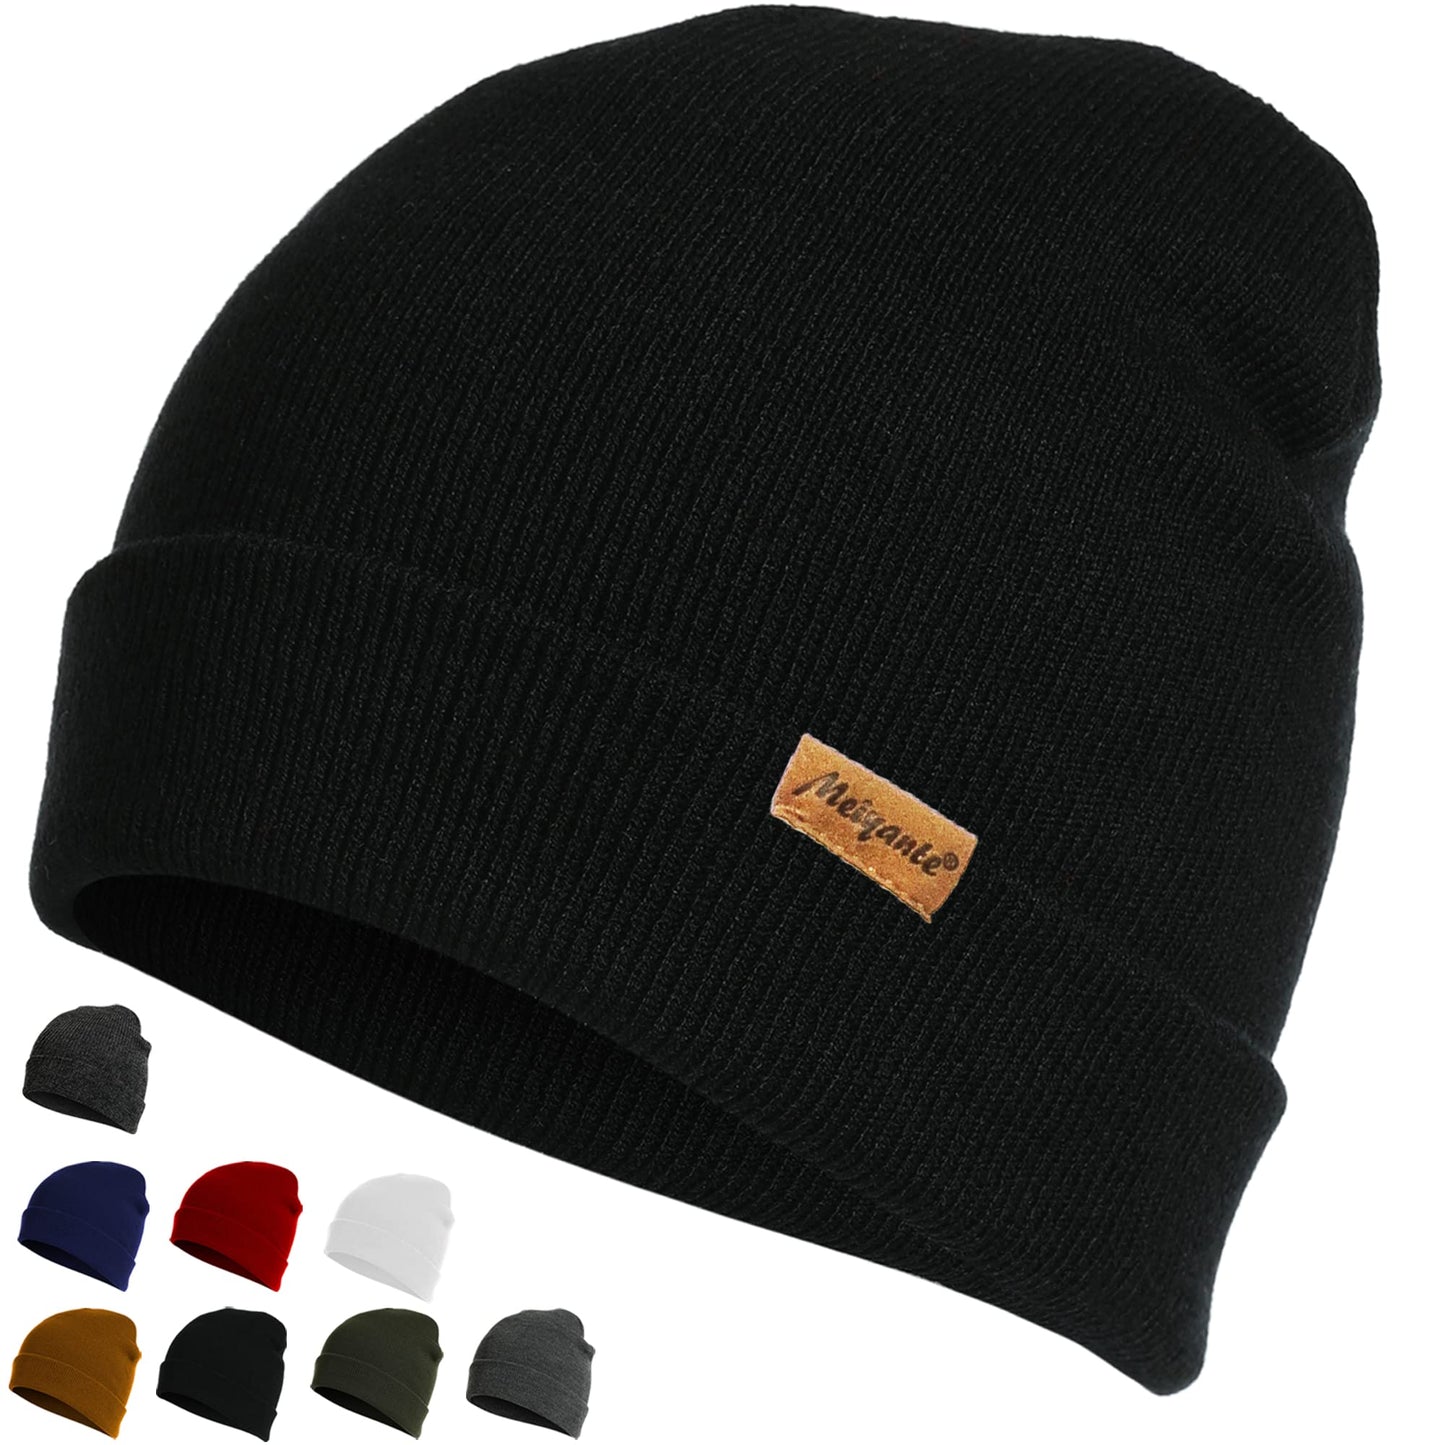 Meiyante Beanie Hats for Men & Women - Warm Stocking Caps for Men & Women, Cuffed Knit Thermal Hats, Gift for Him & Her